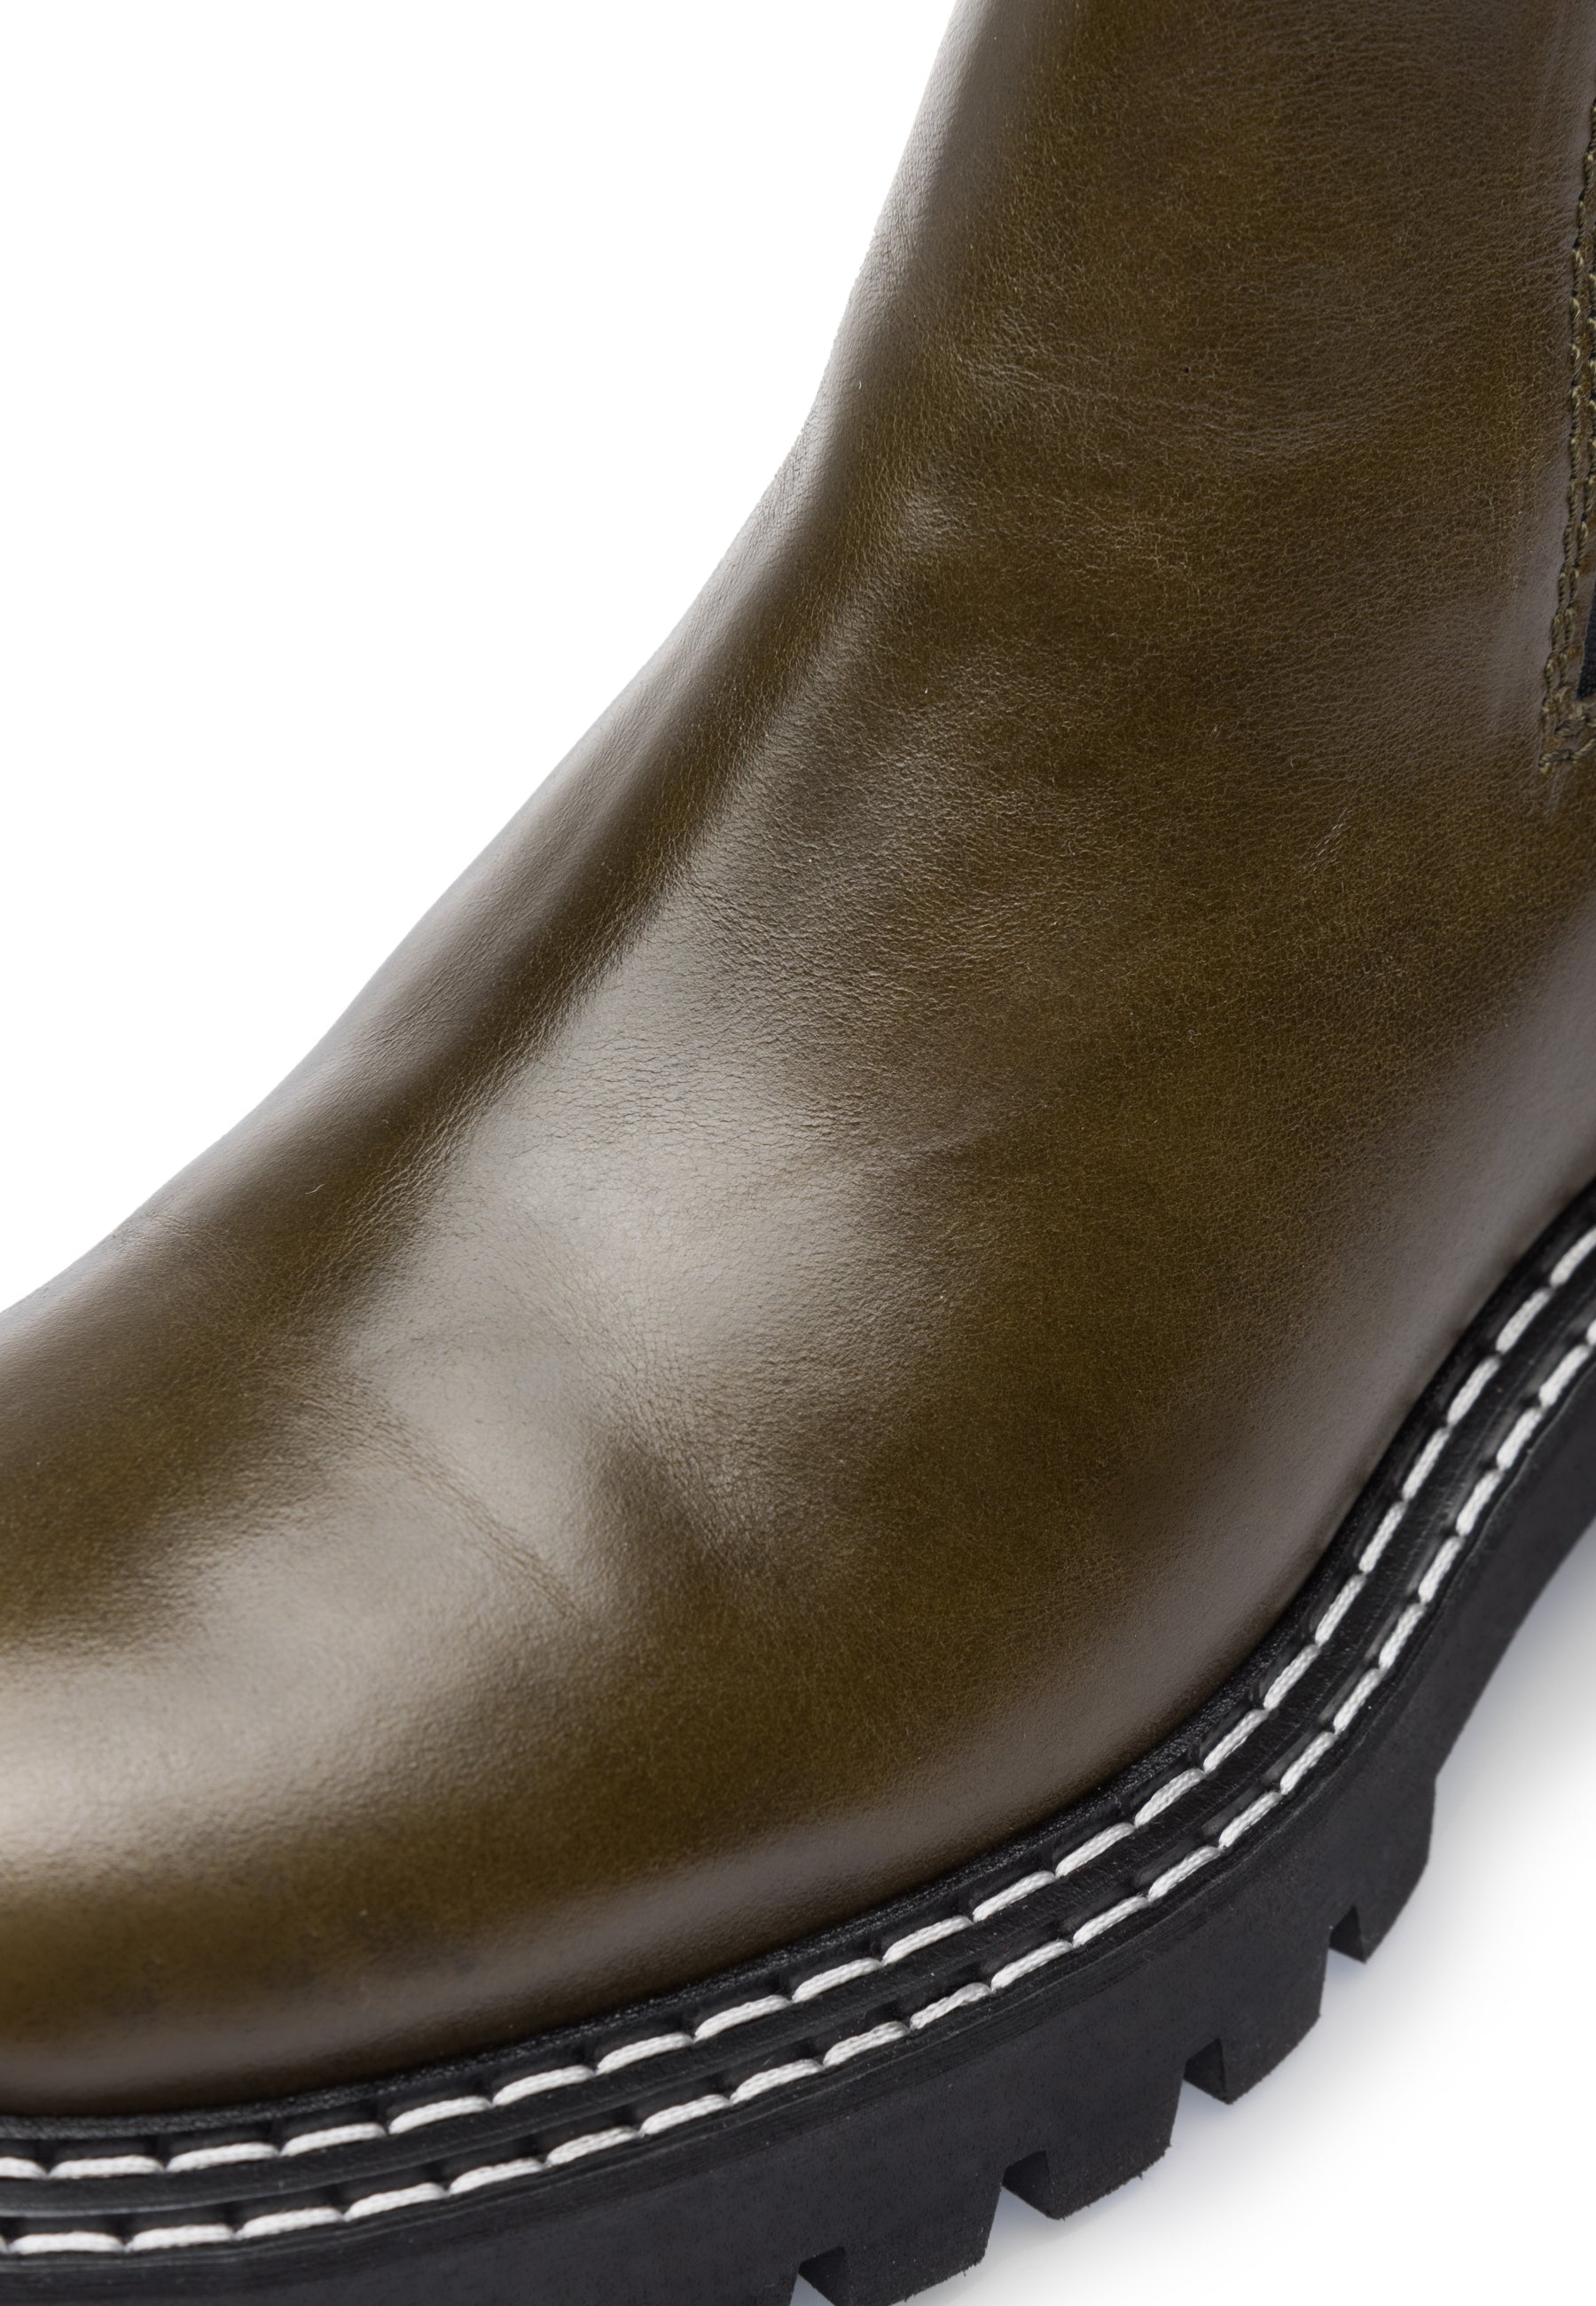 Angie Chelsea Olive Boots LAST1675 - 6